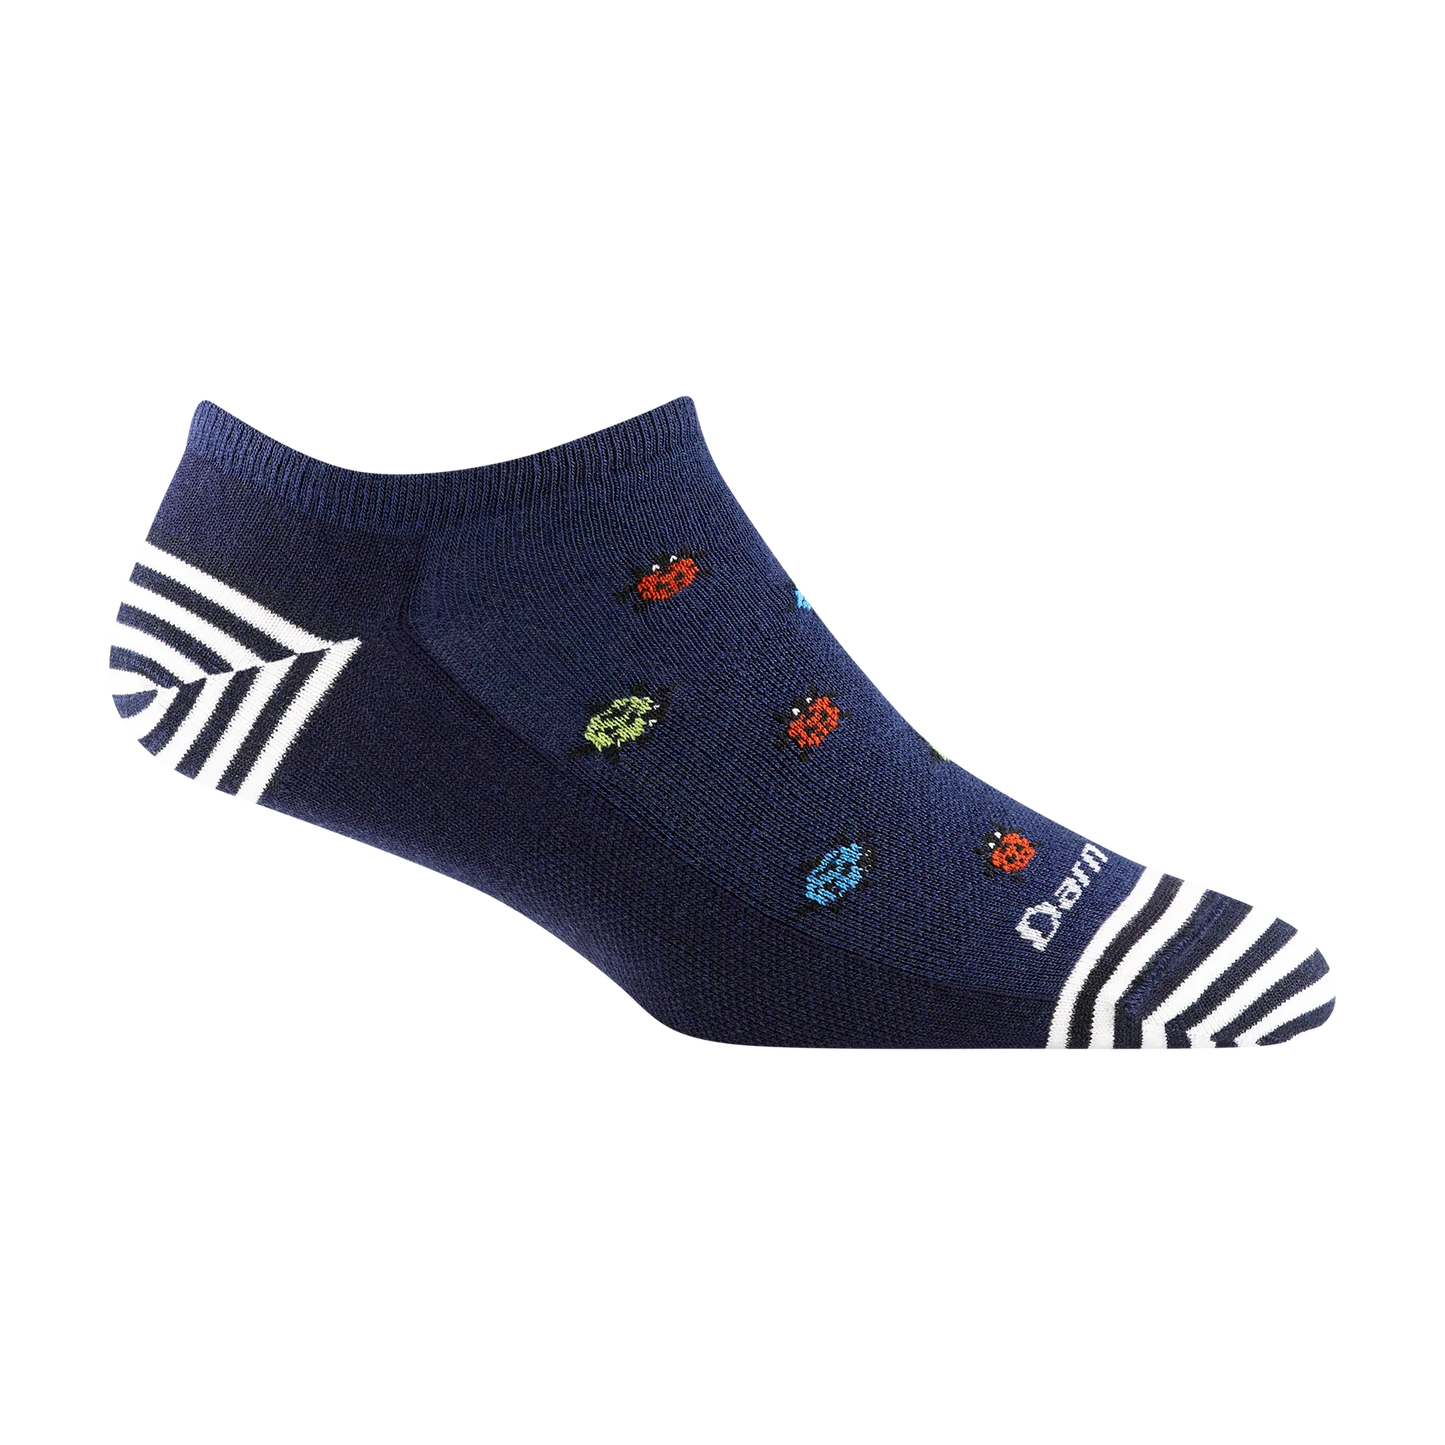 Darn Tough Lifestyle - Women's Lucky Lady No Show Lightweight Lifestyle Sock